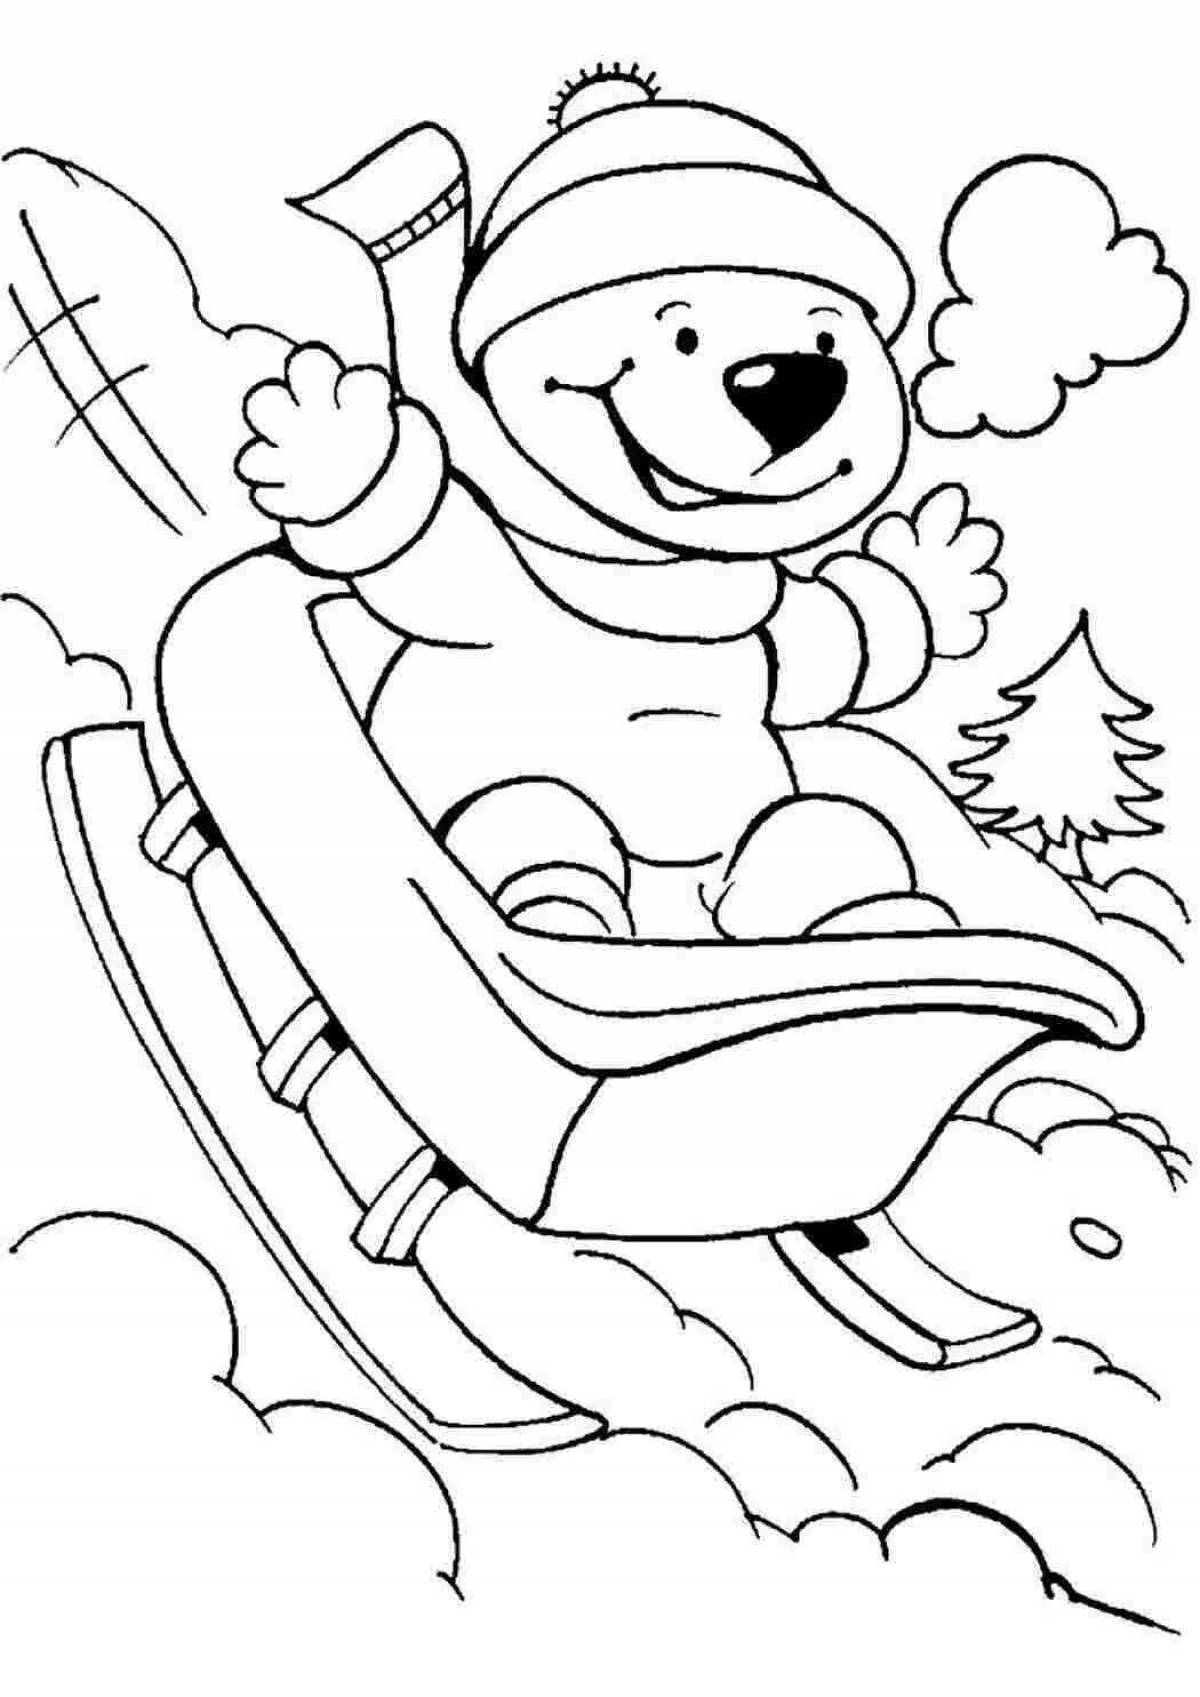 Coloring page blissful child on a sled